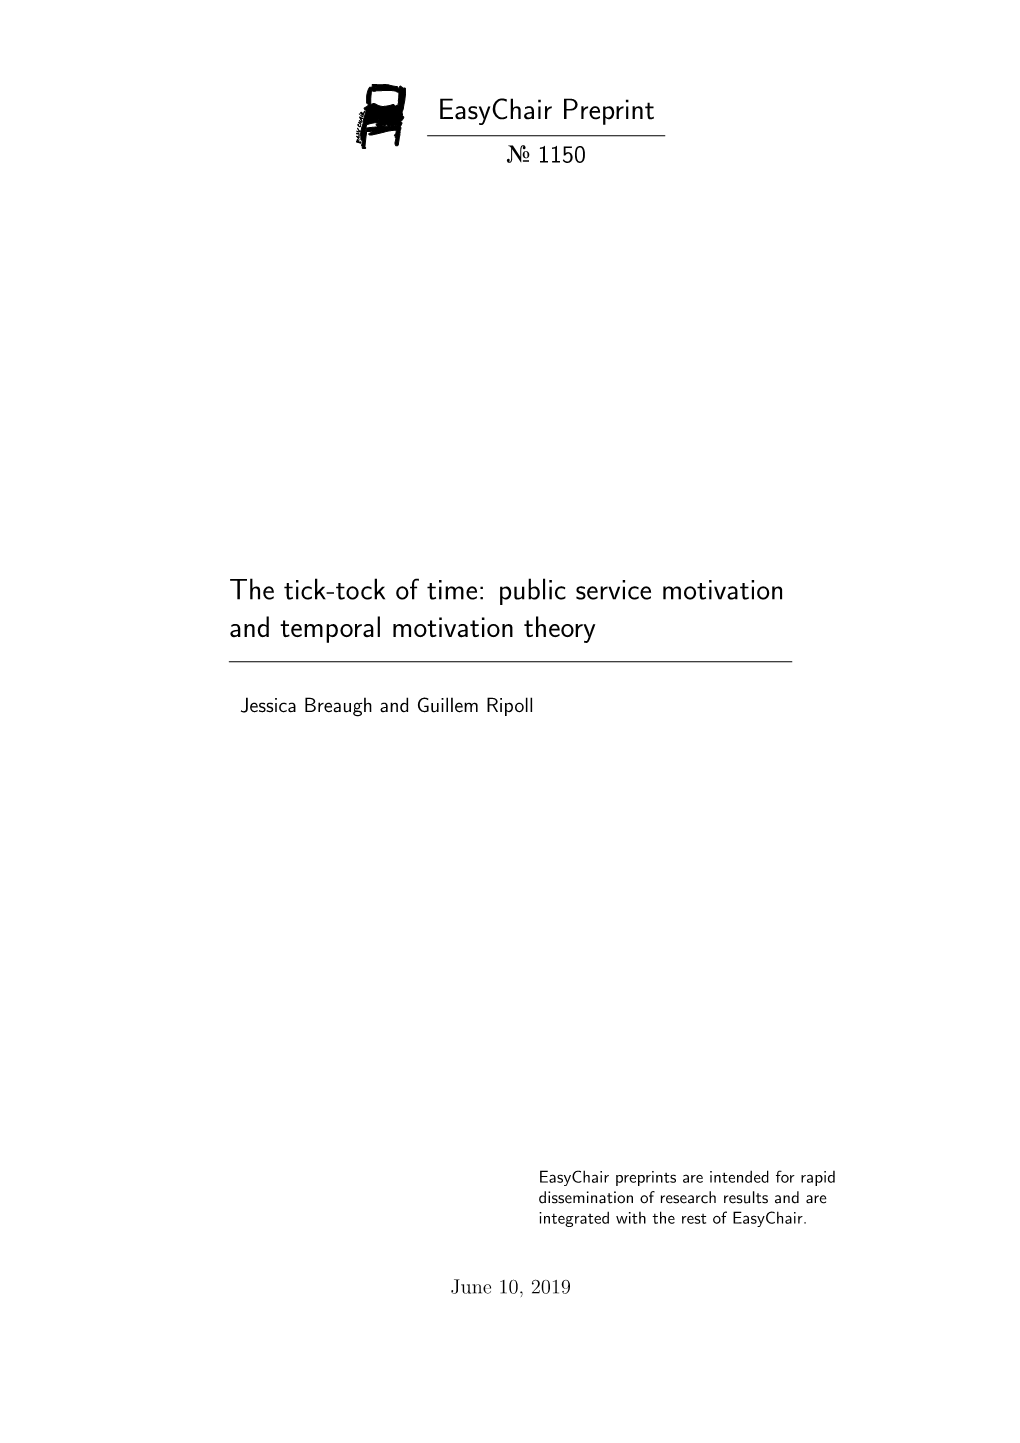 Public Service Motivation and Temporal Motivation Theory